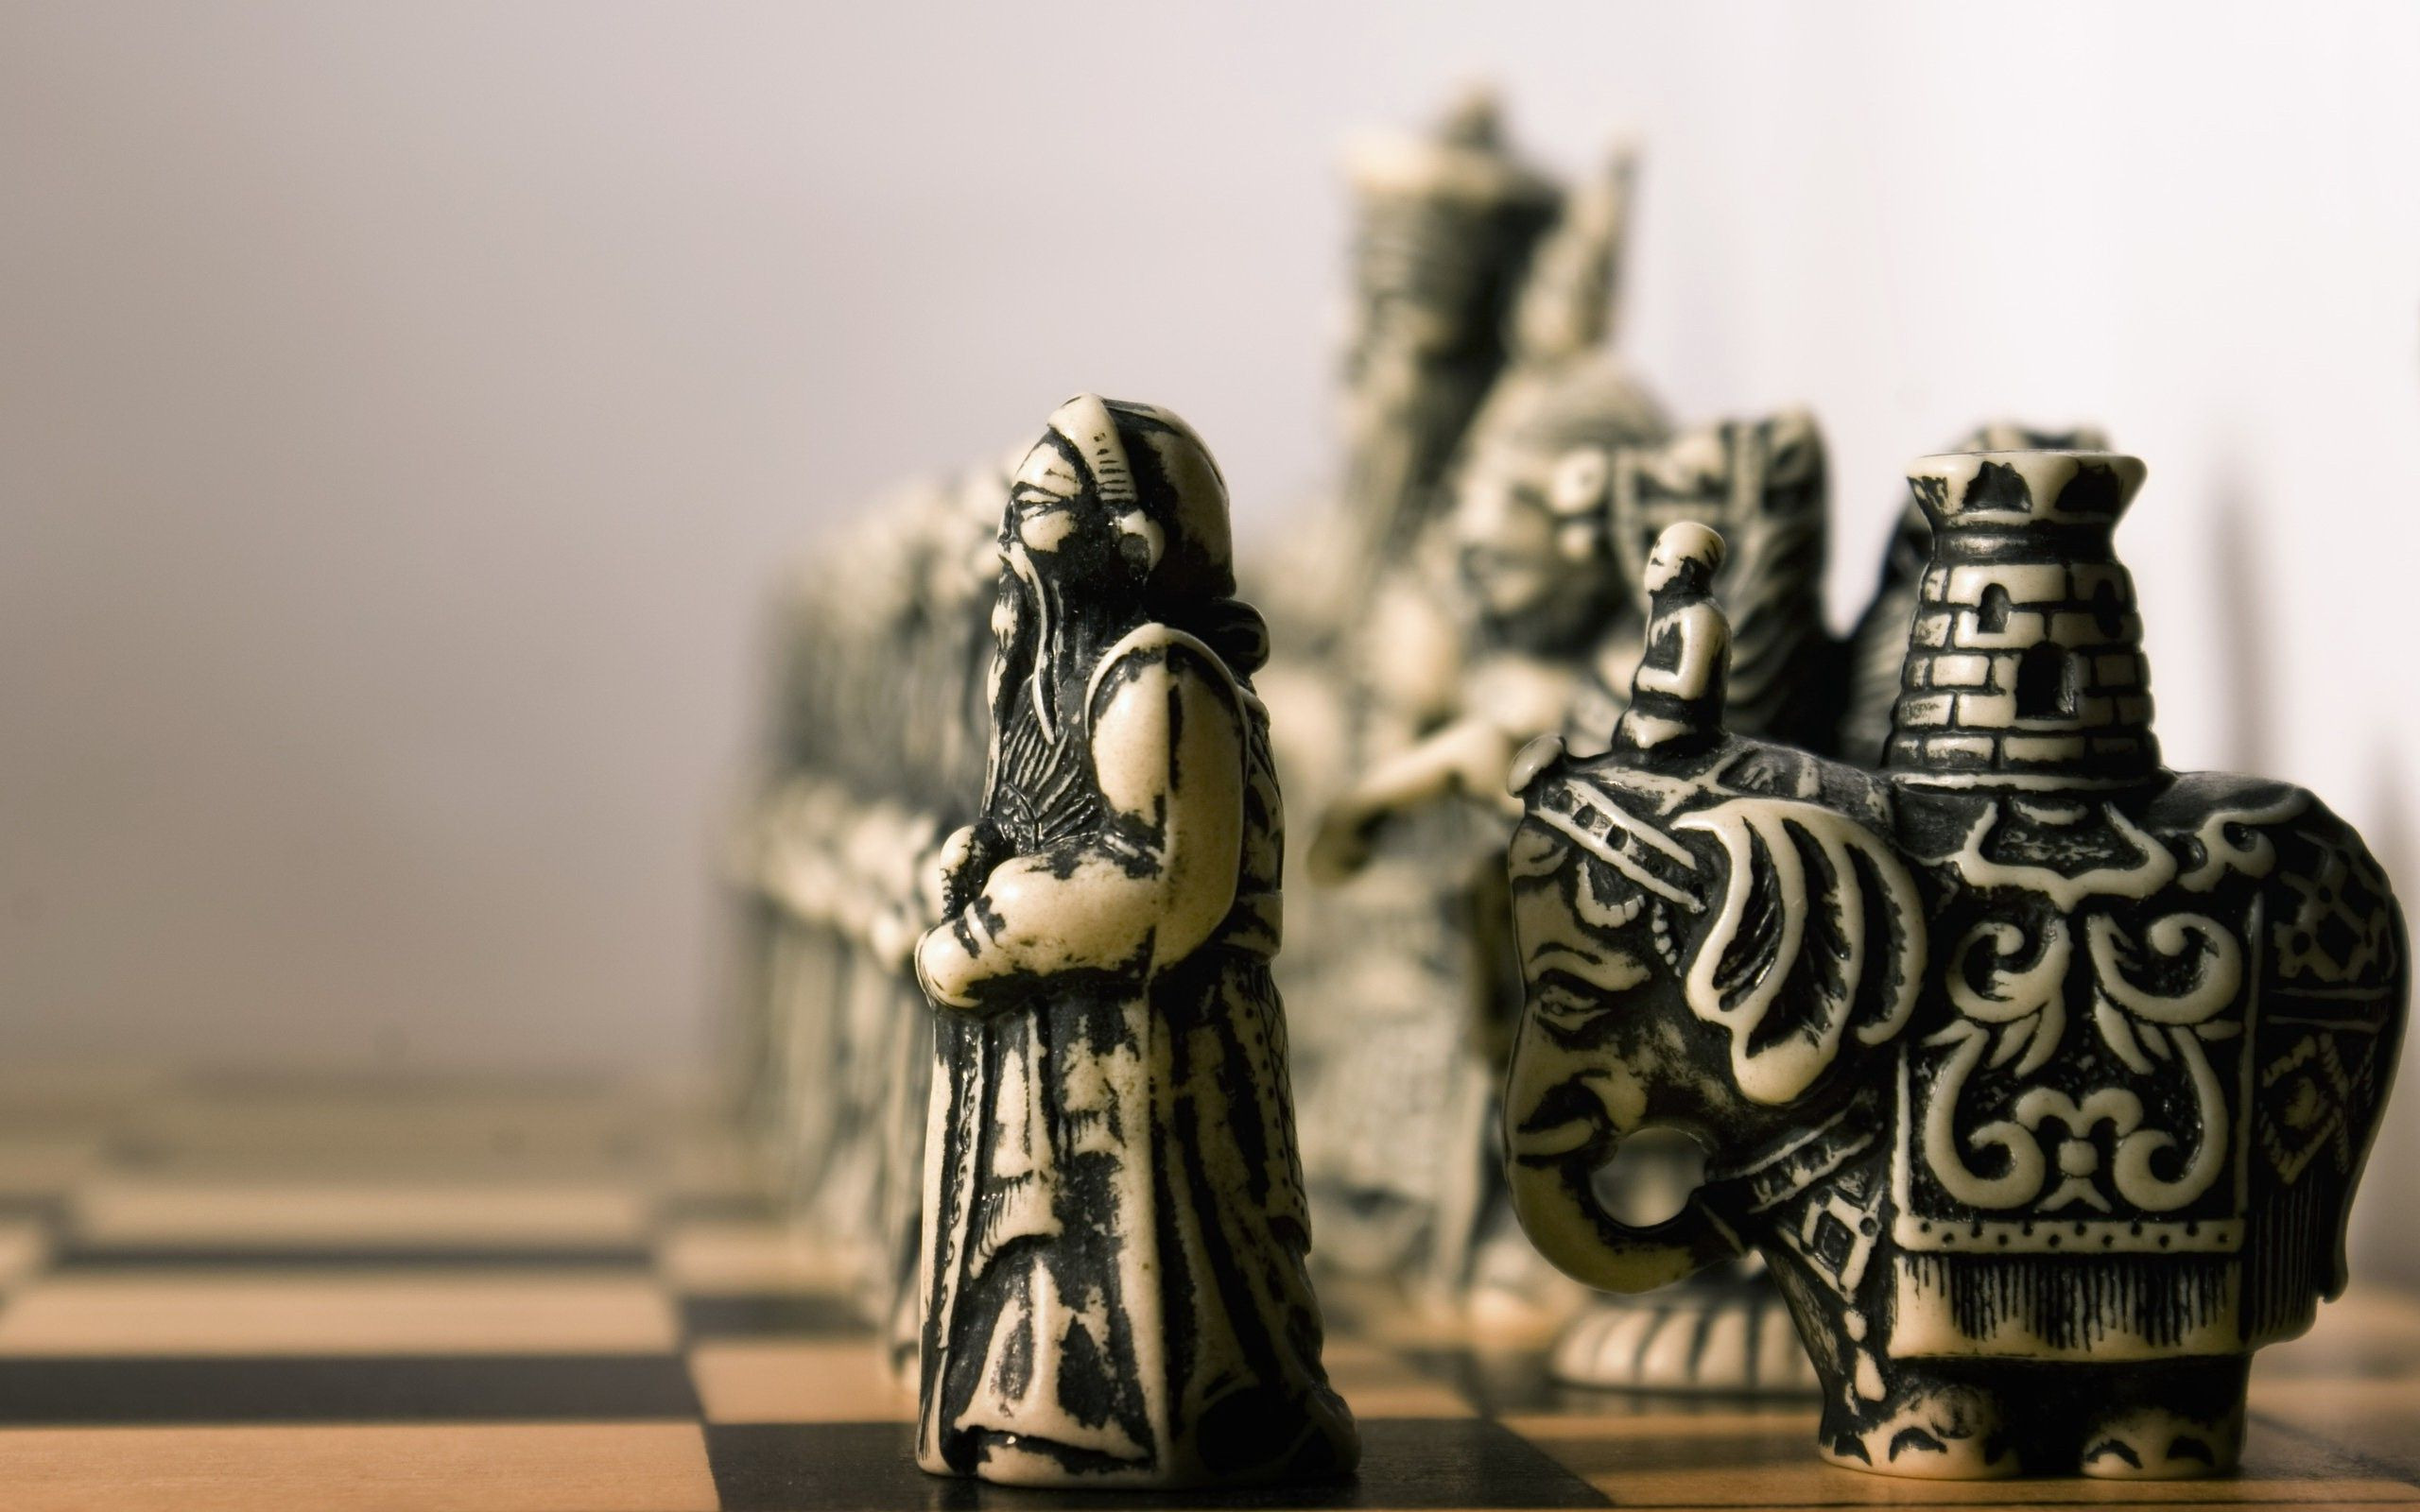 photography, Macro, Chess, Figurines, Board games Wallpaper